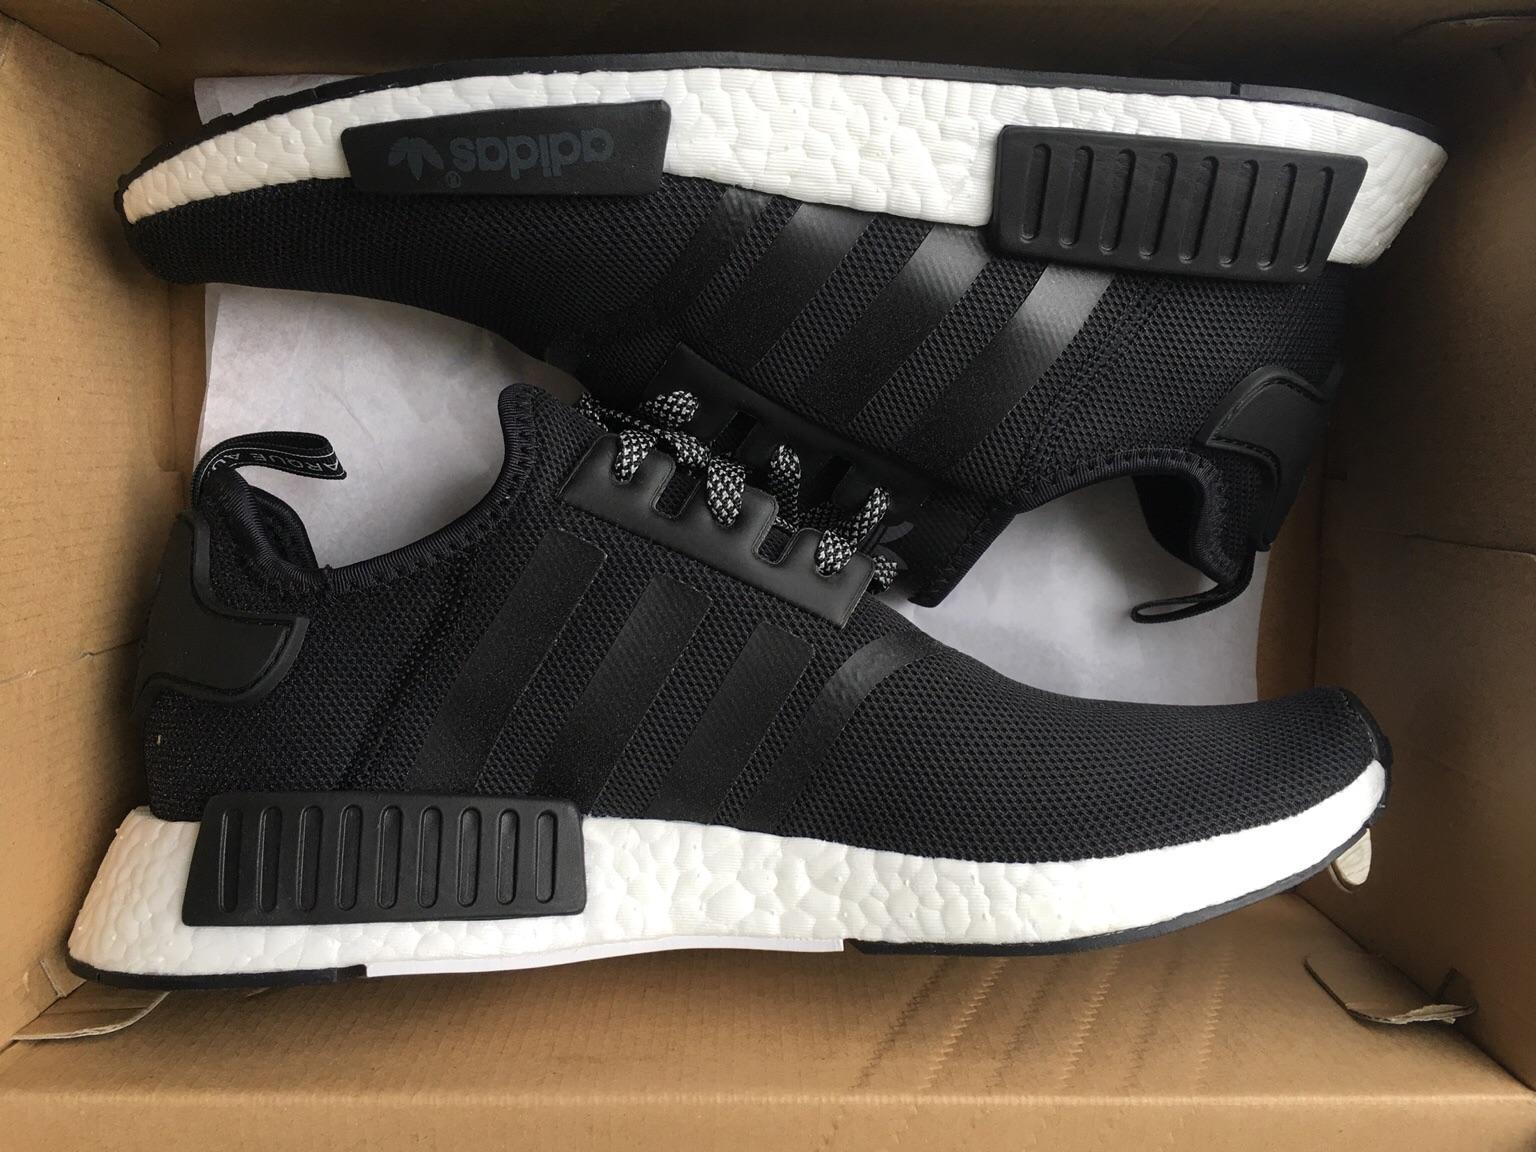 Adidas Nmd R1 Schuhe Eu 45 1 3 Black In Furth For 1 00 For Sale Shpock